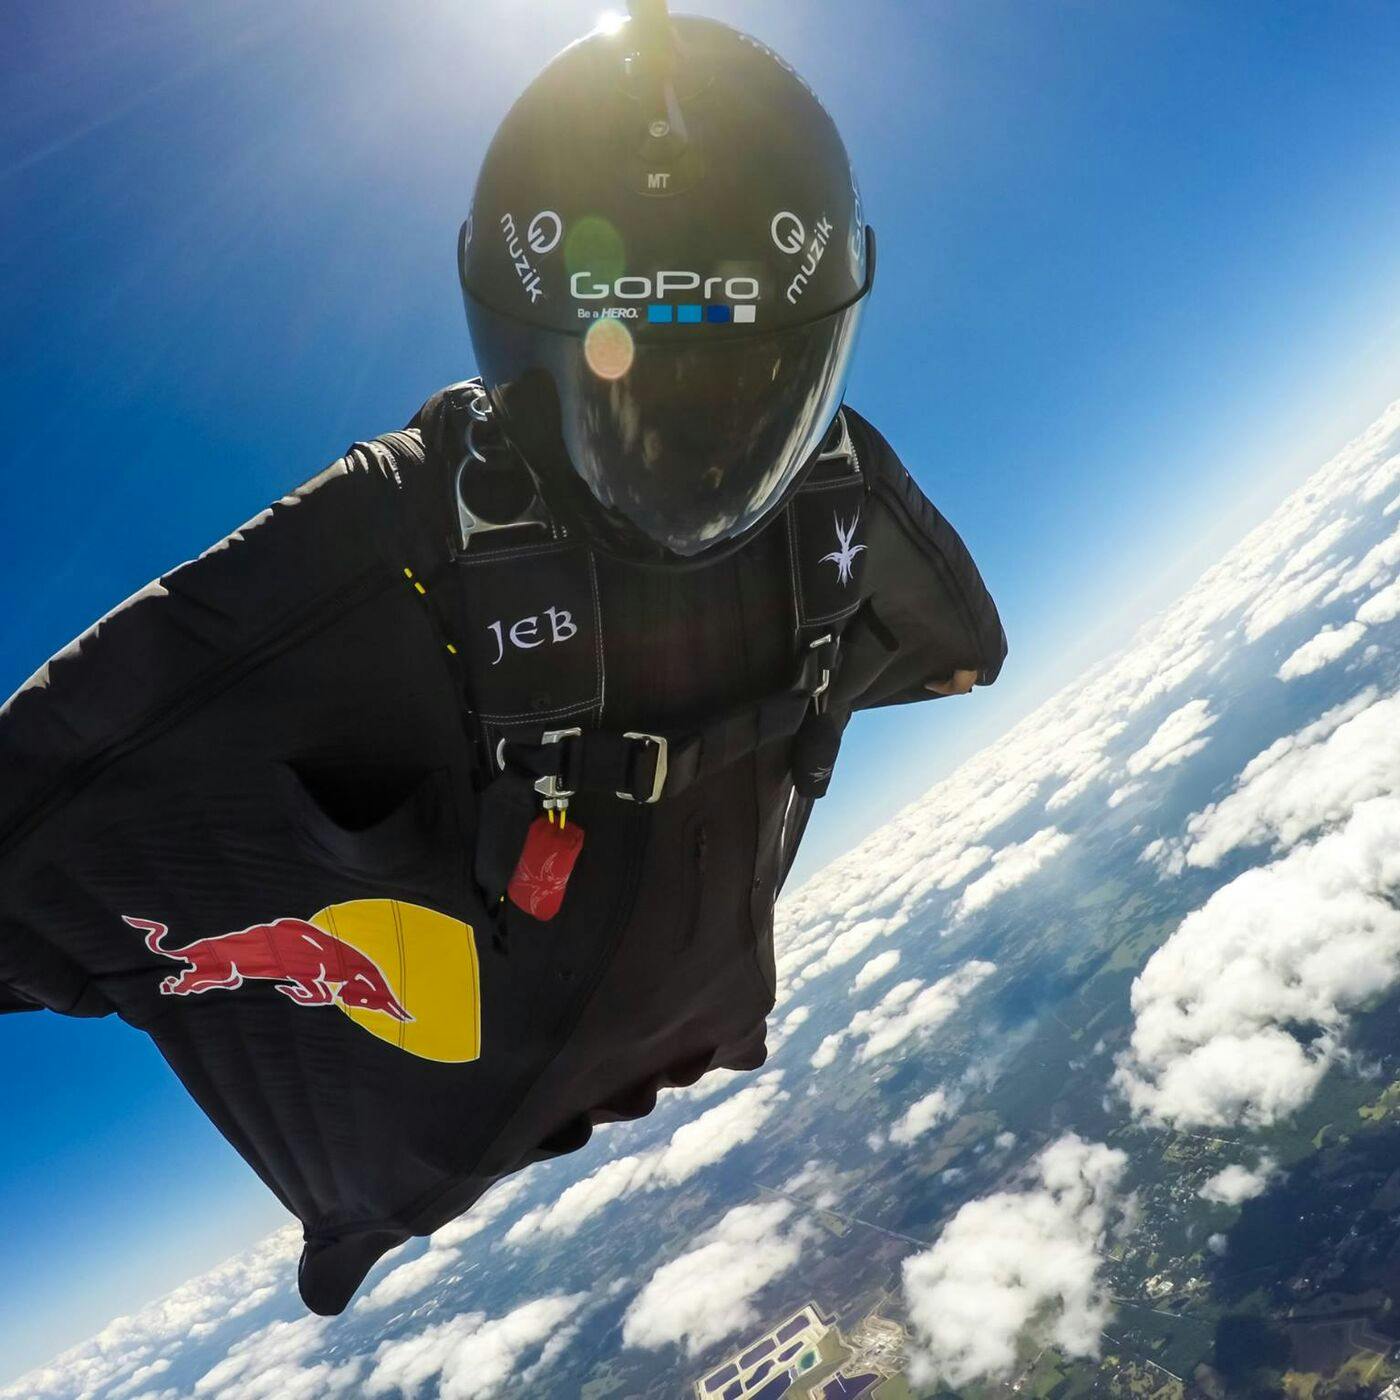 Stories from the Edge with Legendary BASE Jumper Jeb Corliss